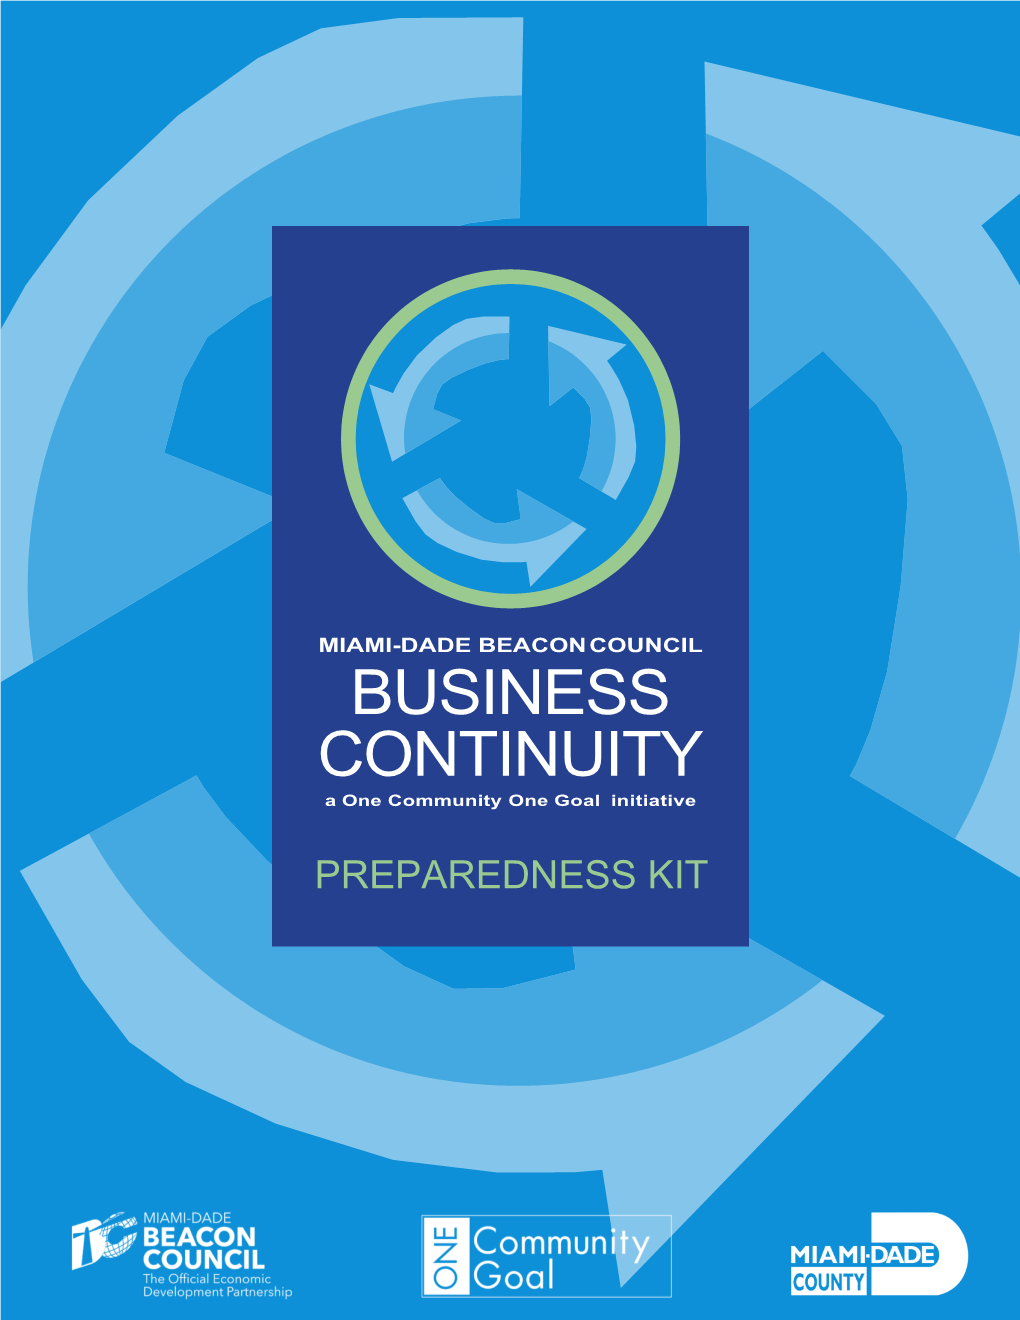 BUSINESS CONTINUITY a One Community One Goal Initiative